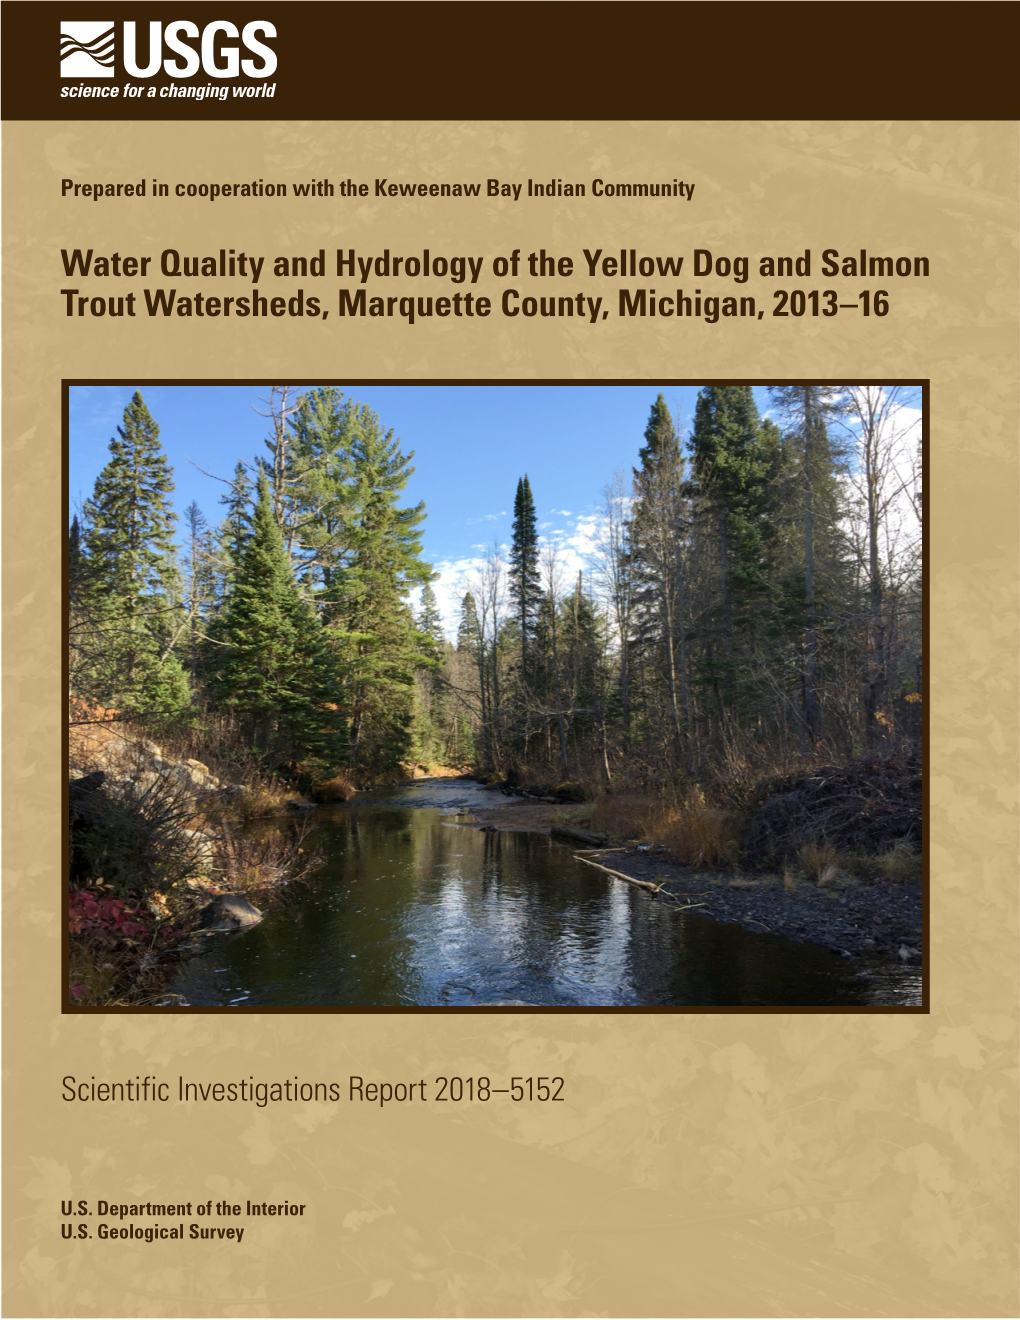 Water Quality and Hydrology of the Yellow Dog and Salmon Trout Watersheds, Marquette County, Michigan, 2013–16